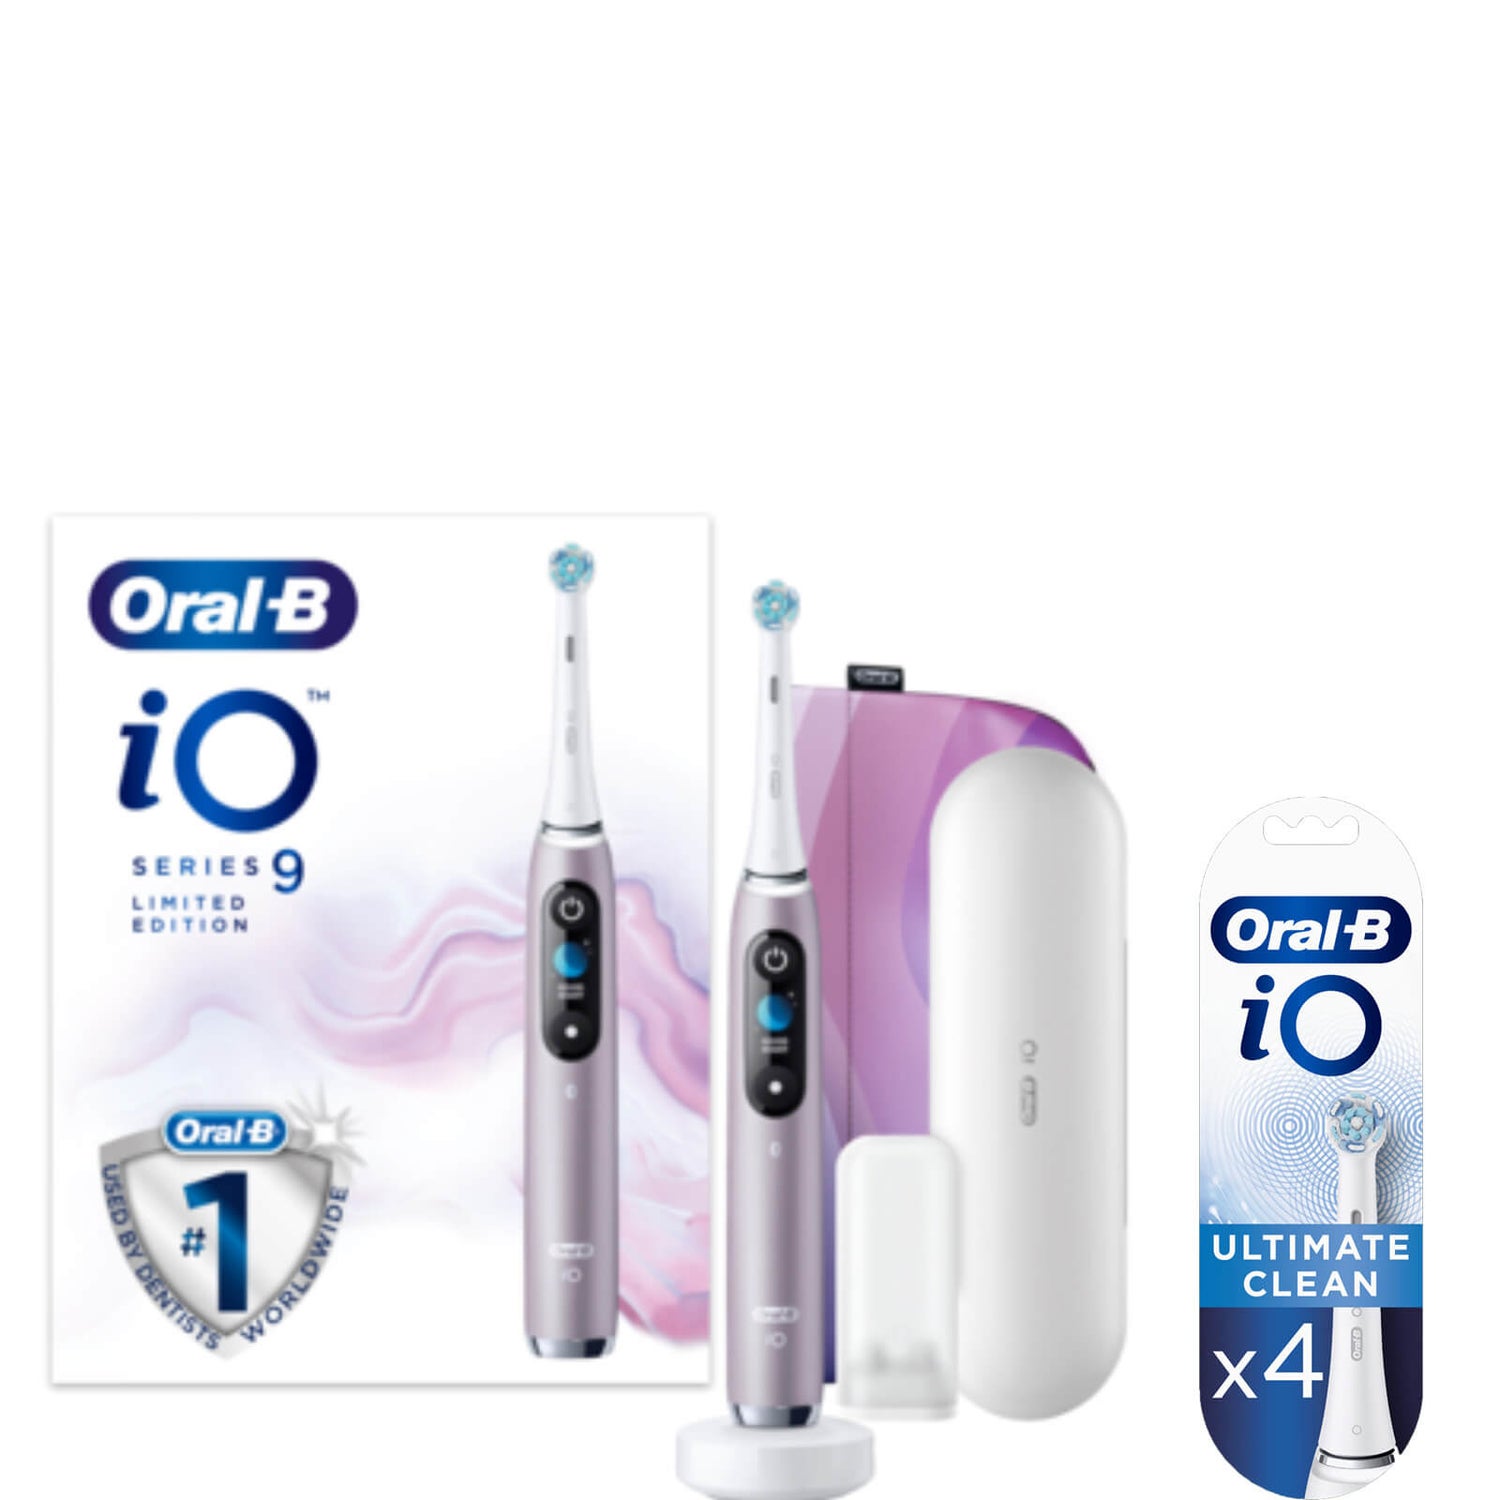 Oral-B iO9 Rose Quartz Electric Toothbrush with Charging Travel Case, Magnetic Pouch & Toothbrush Heads Bundle - White